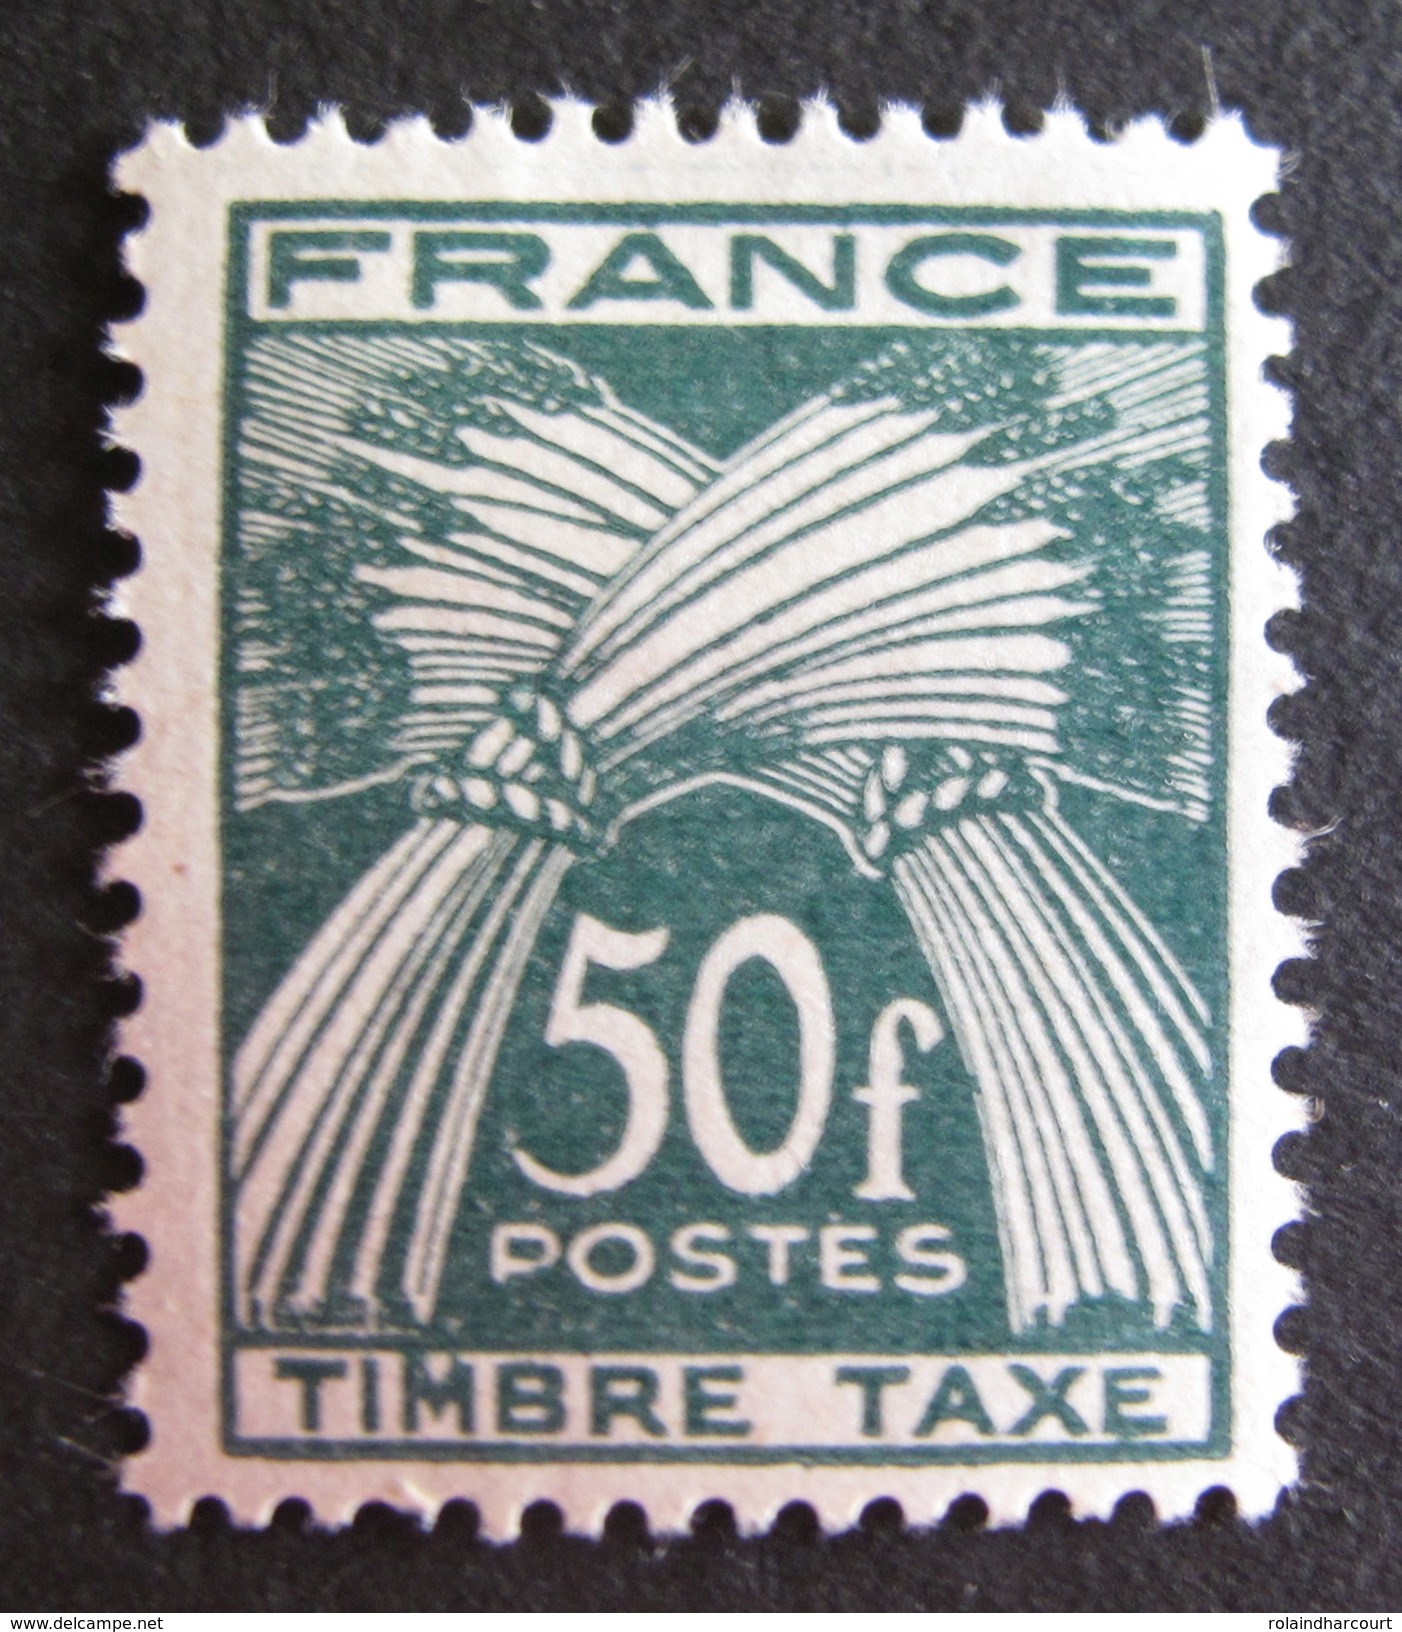 LOT R1592/160 - 1946 - TIMBRE TAXE - N°88 NEUF* - Cote : 15,00 &euro; - 1859-1959 Mint/hinged